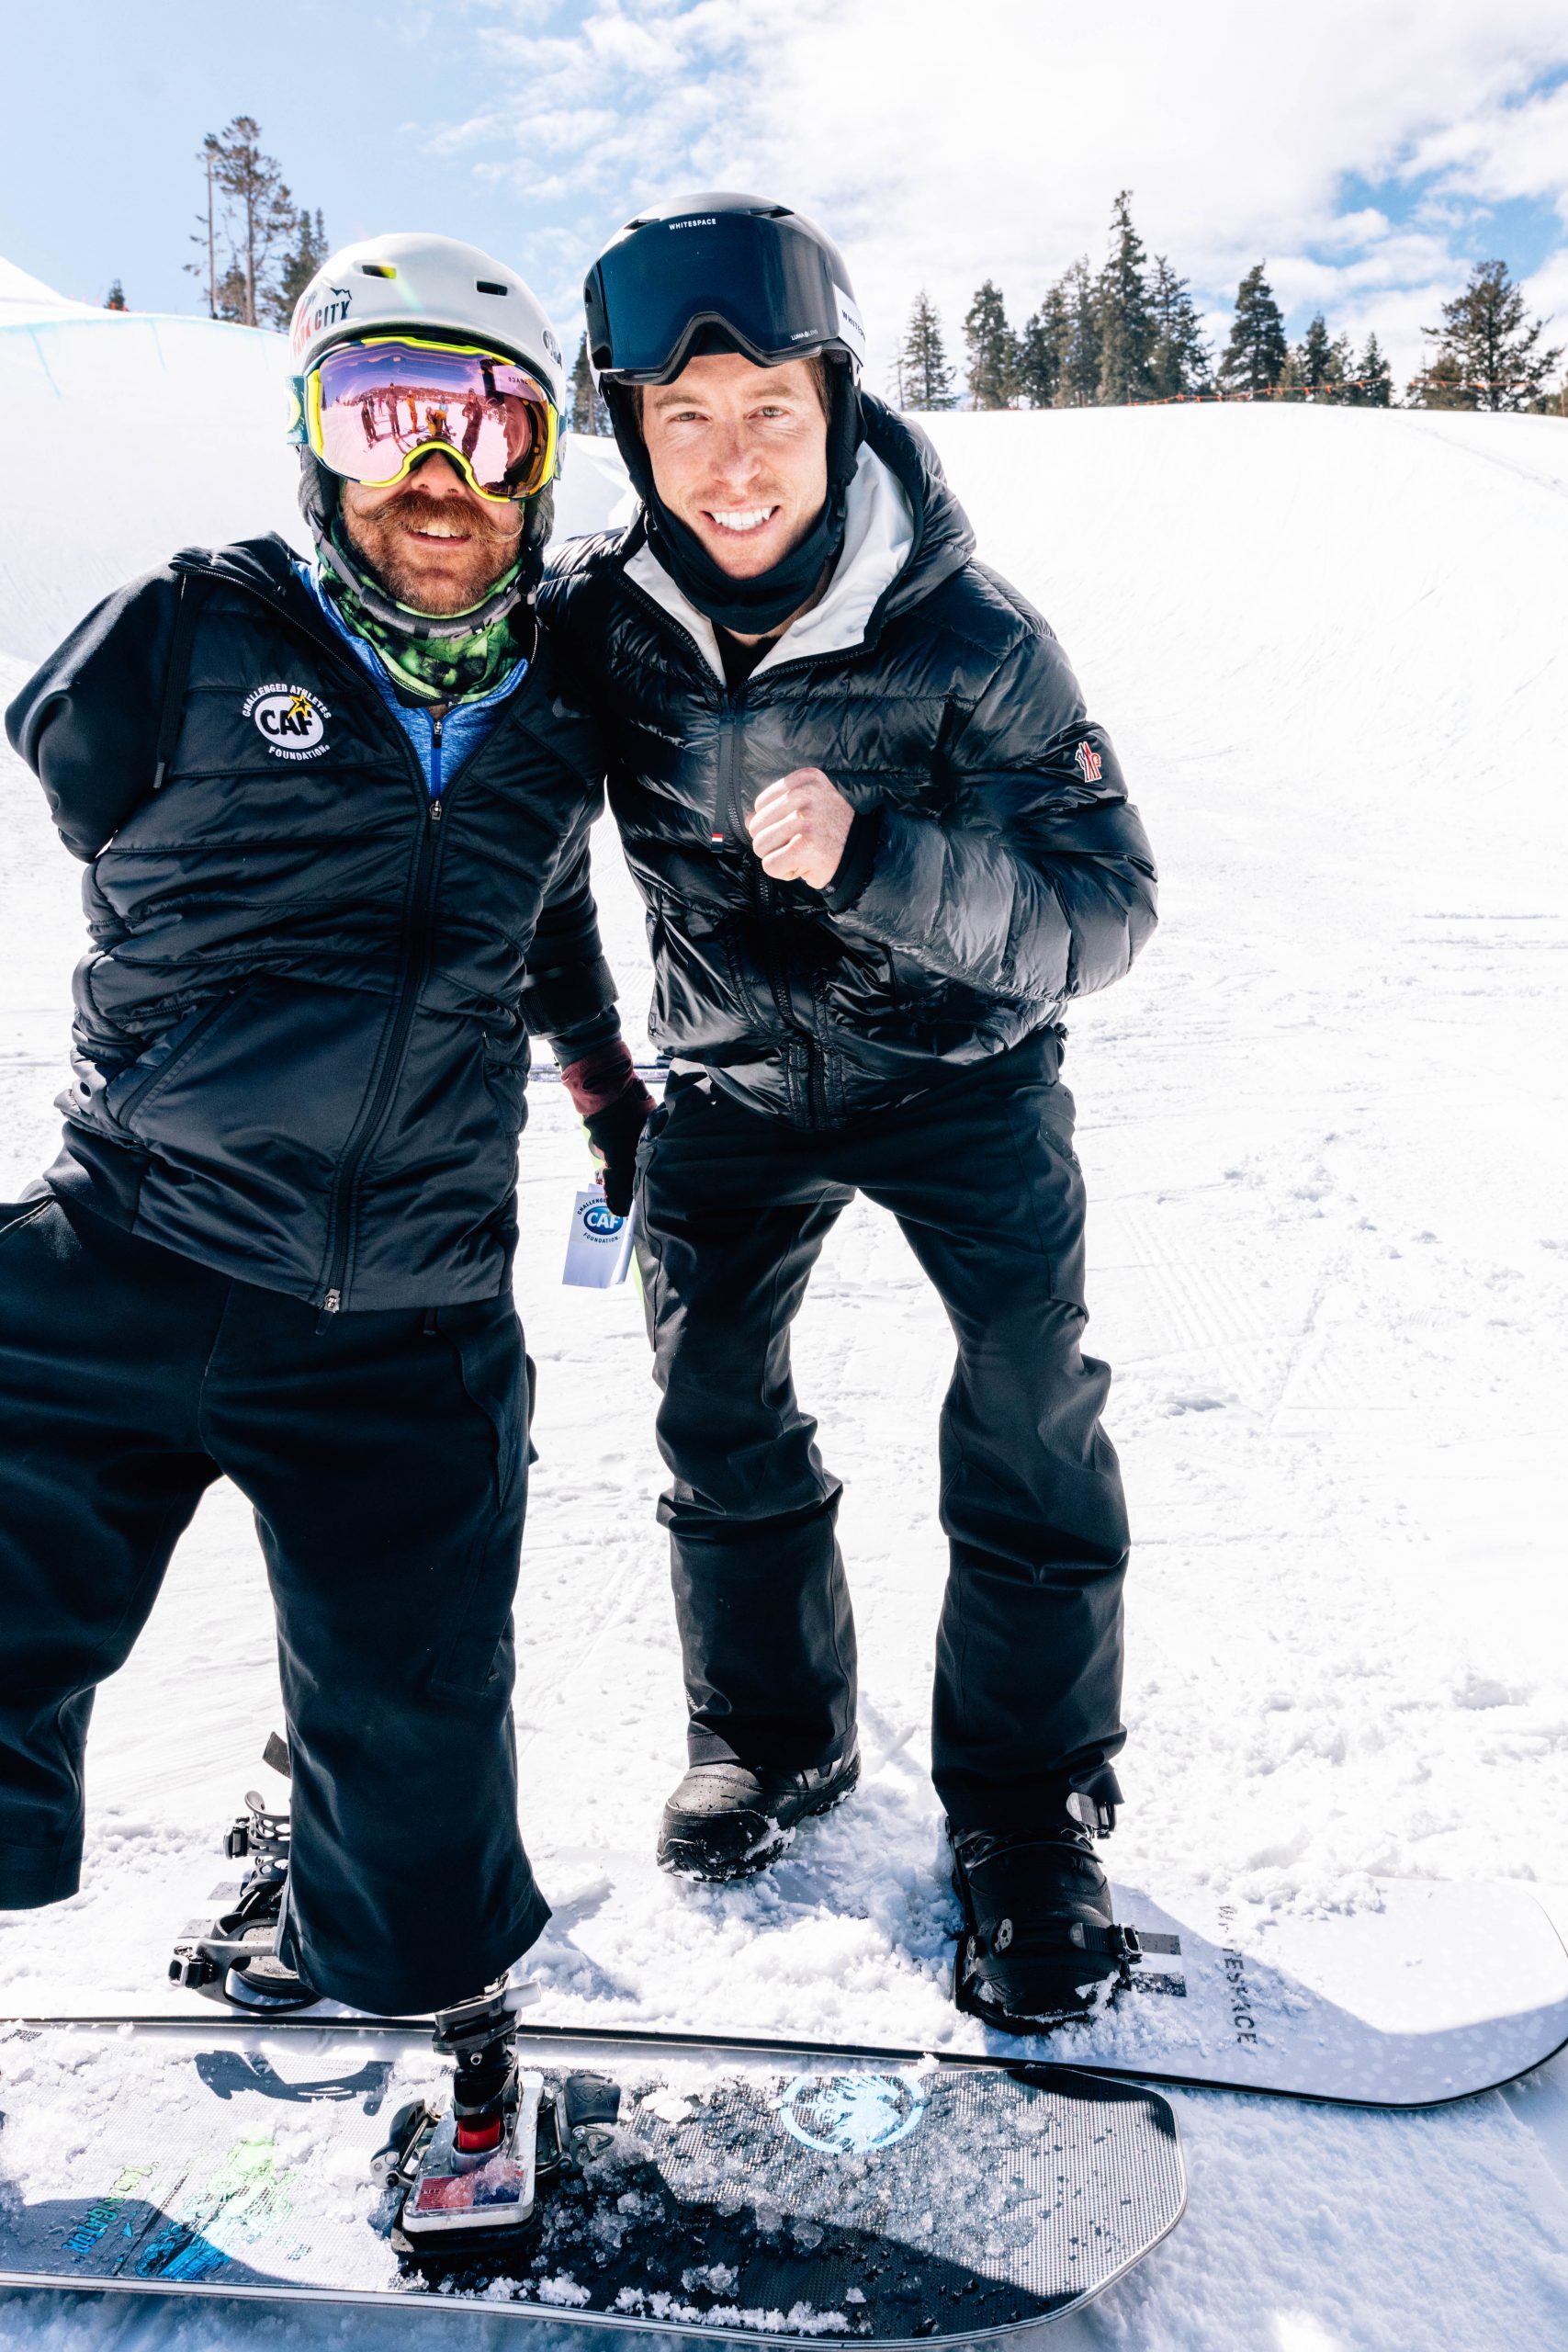 Shaun White surprises triple-amputee snowboarder with Challenged